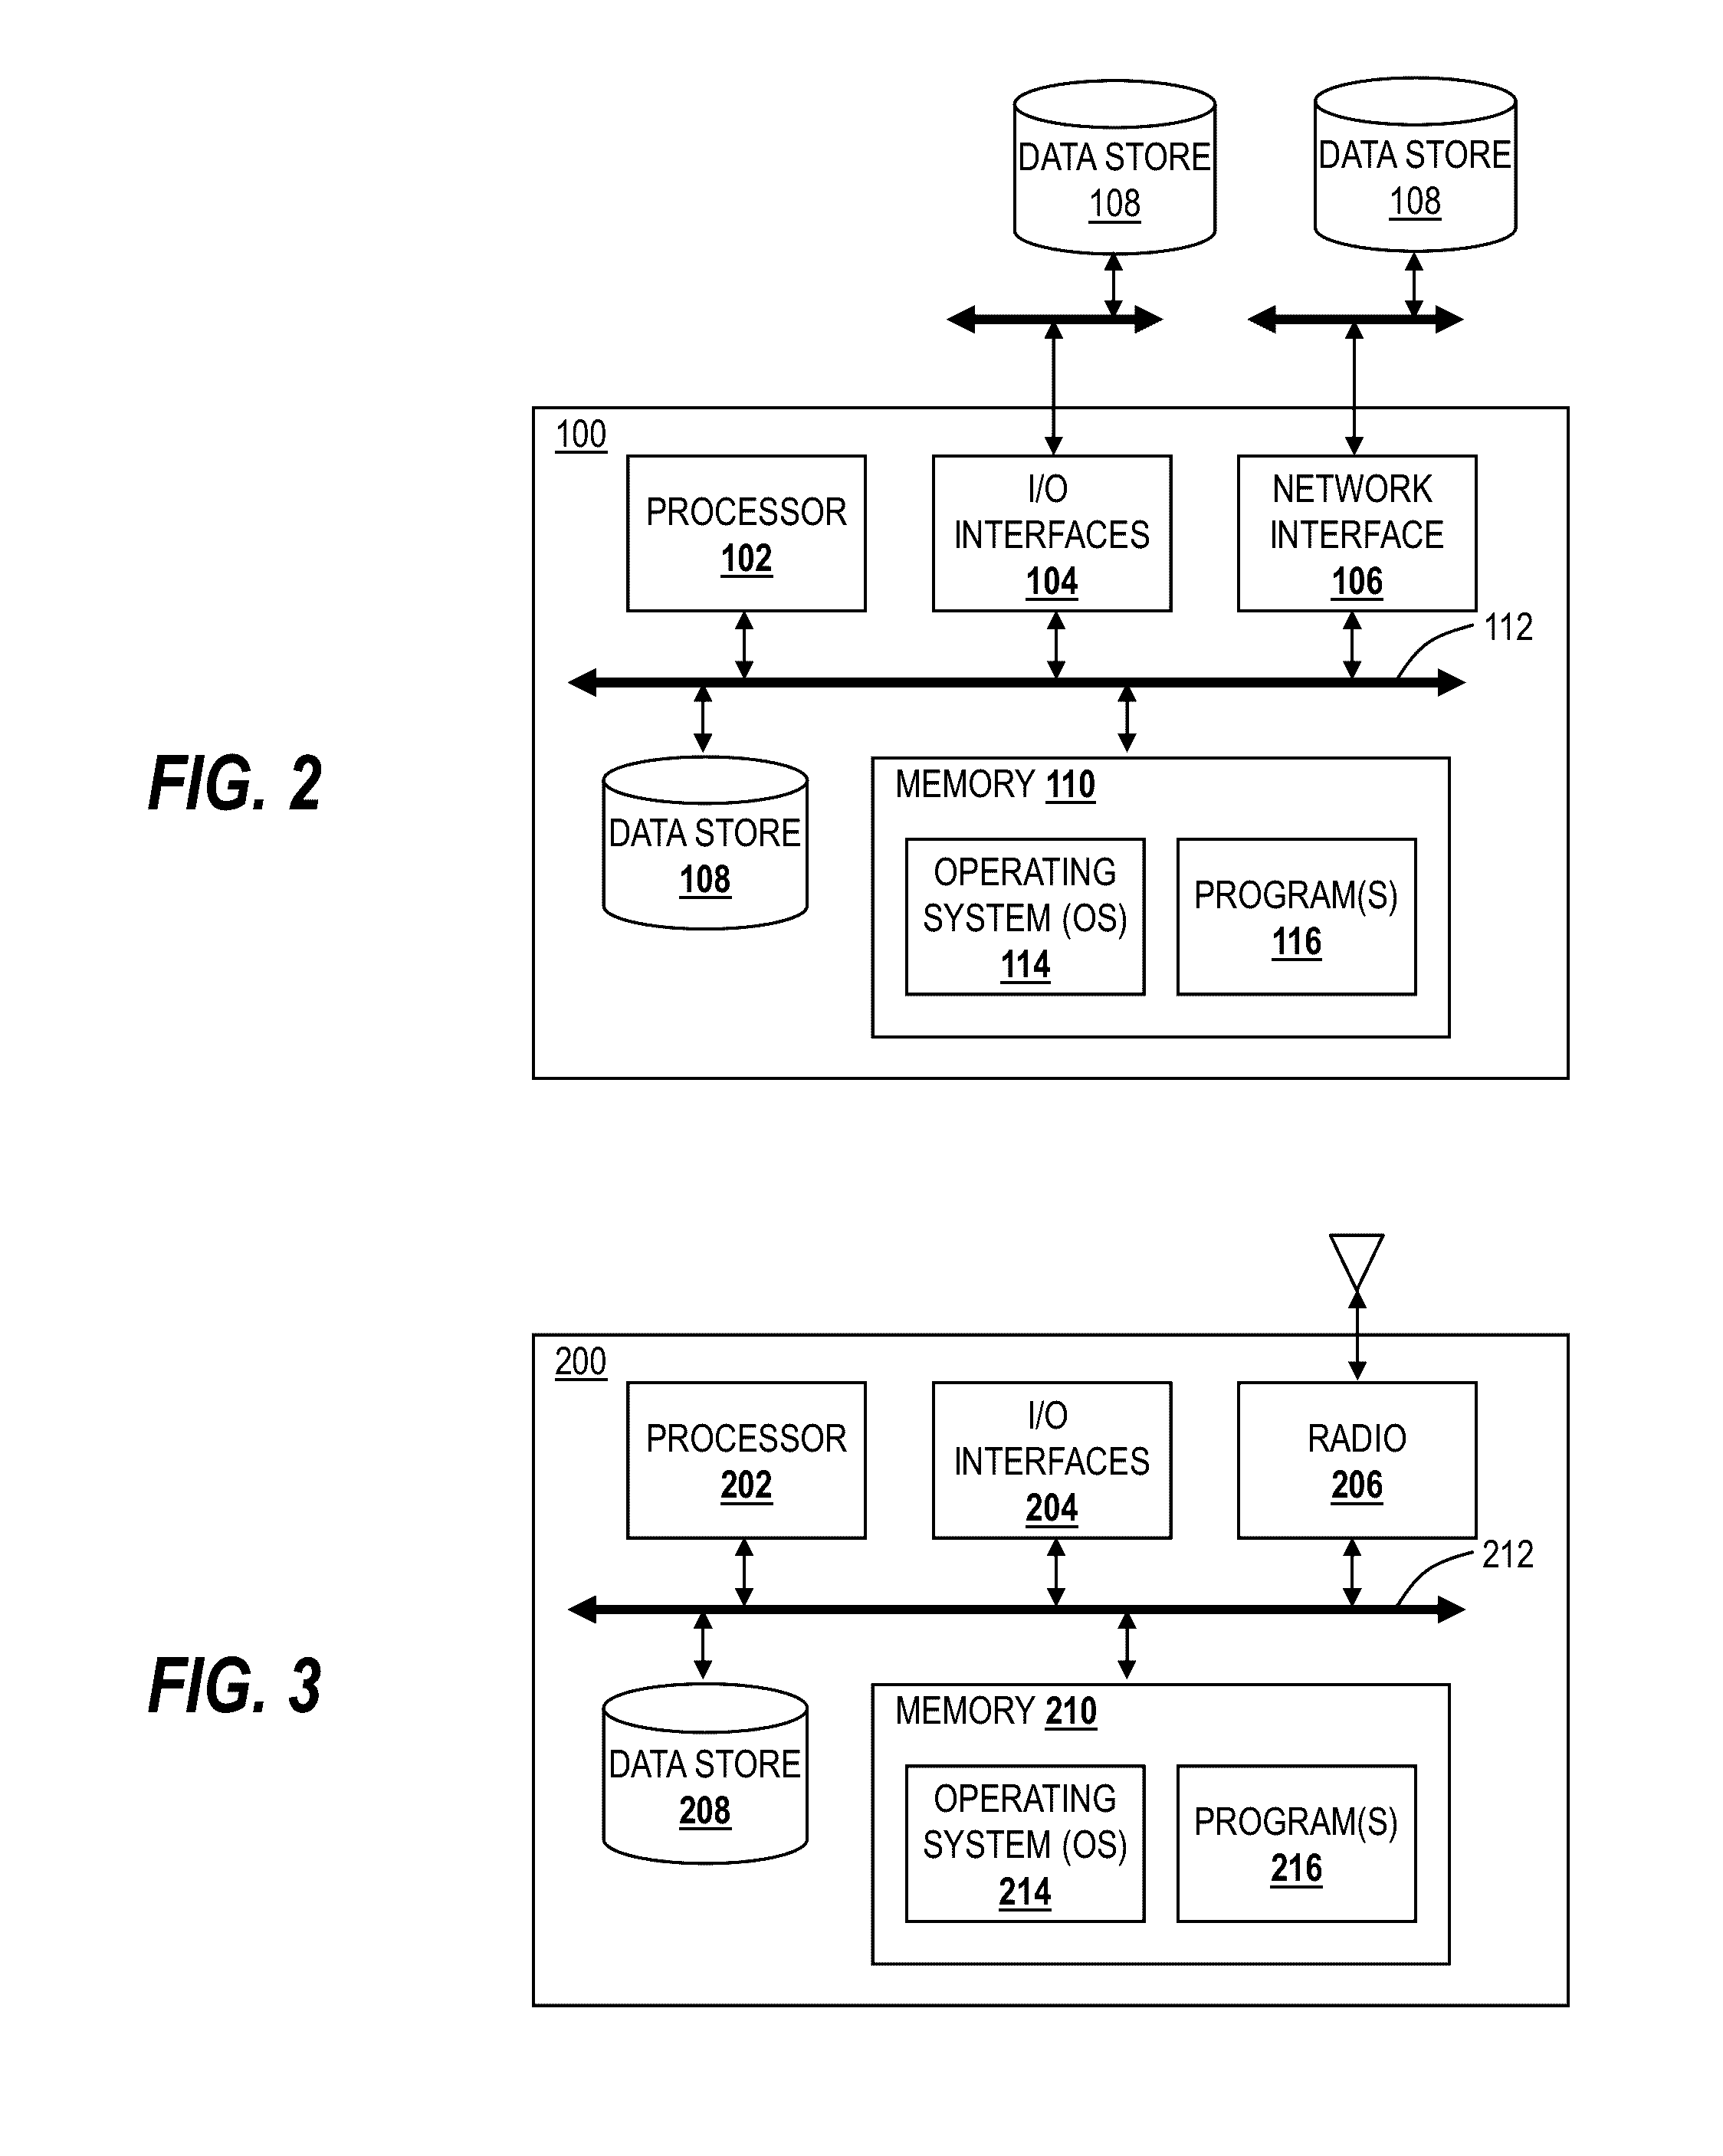 Systems and methods for tracking, analyzing and mitigating security threats in networks via a network traffic analysis platform